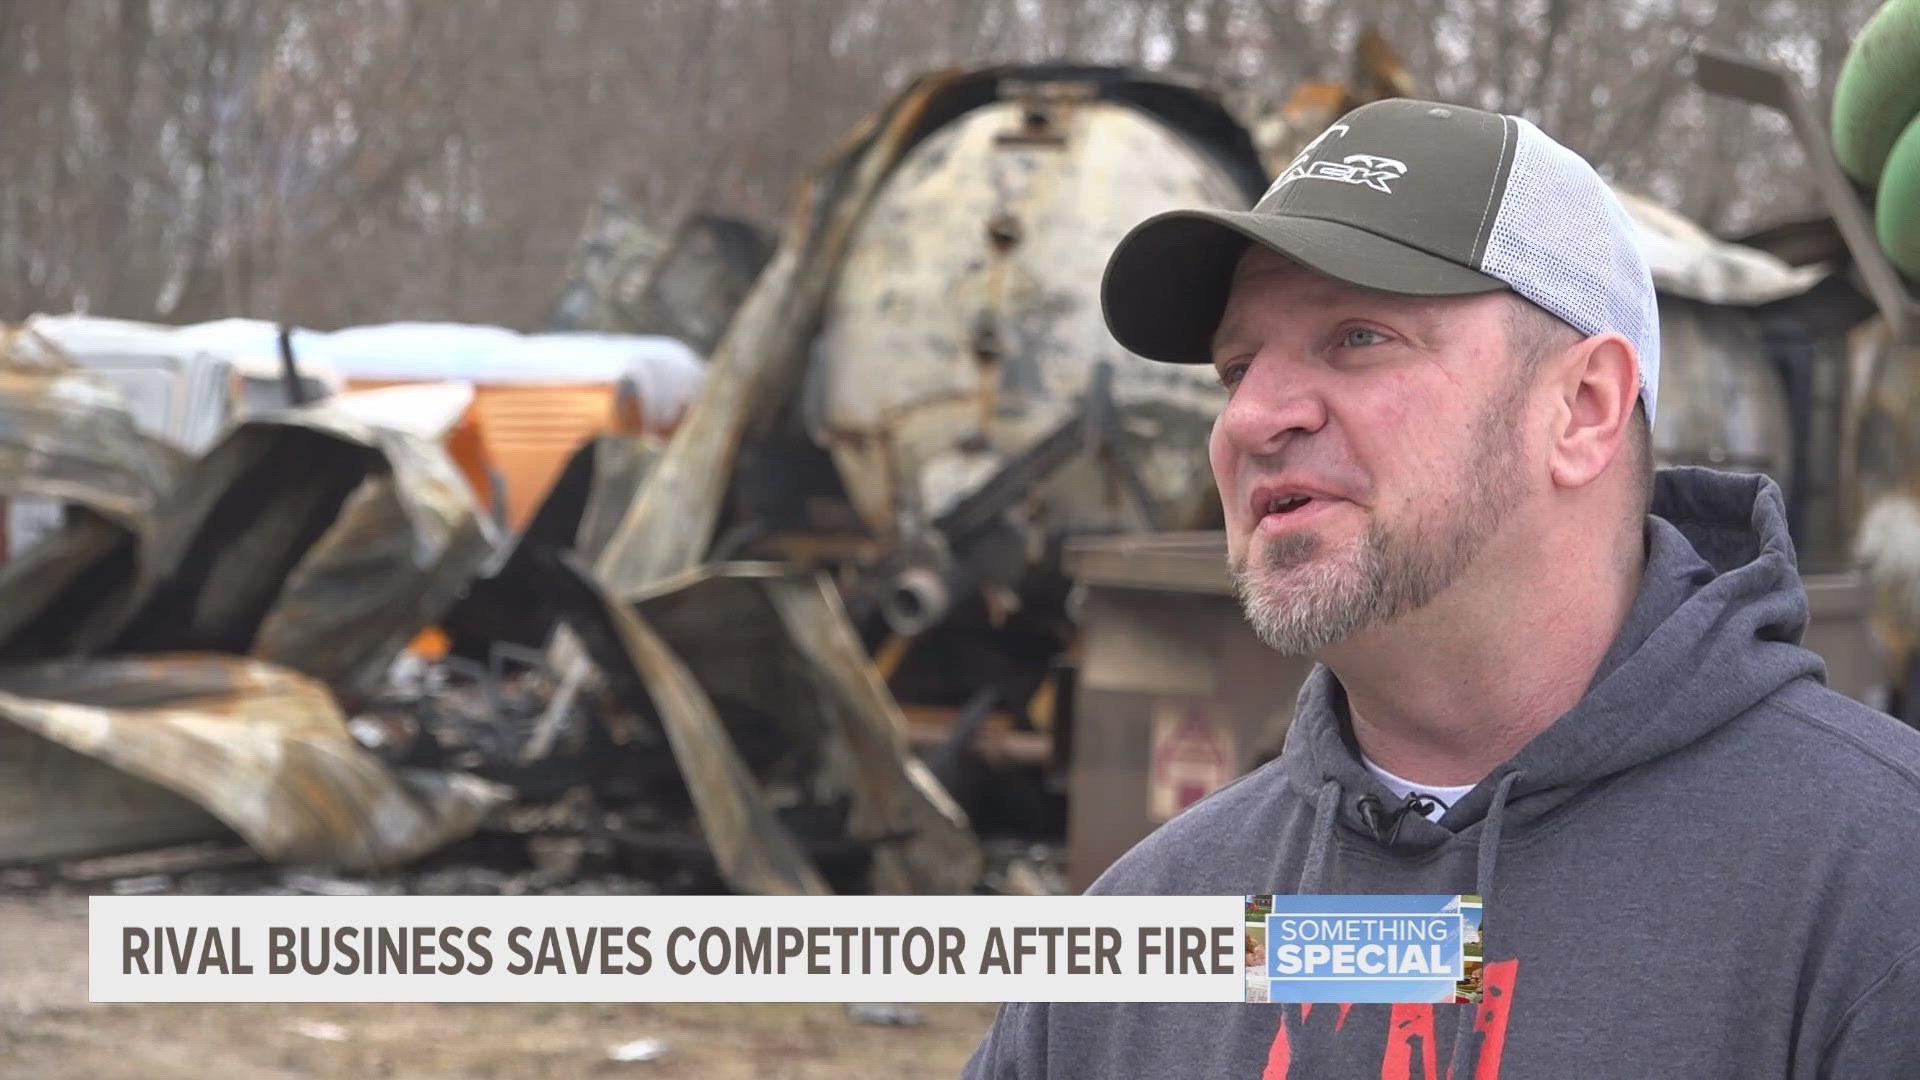 The owner of a small septic company is still smiling after a devastating fire destroyed his business. It's all thanks to the kindness of strangers.